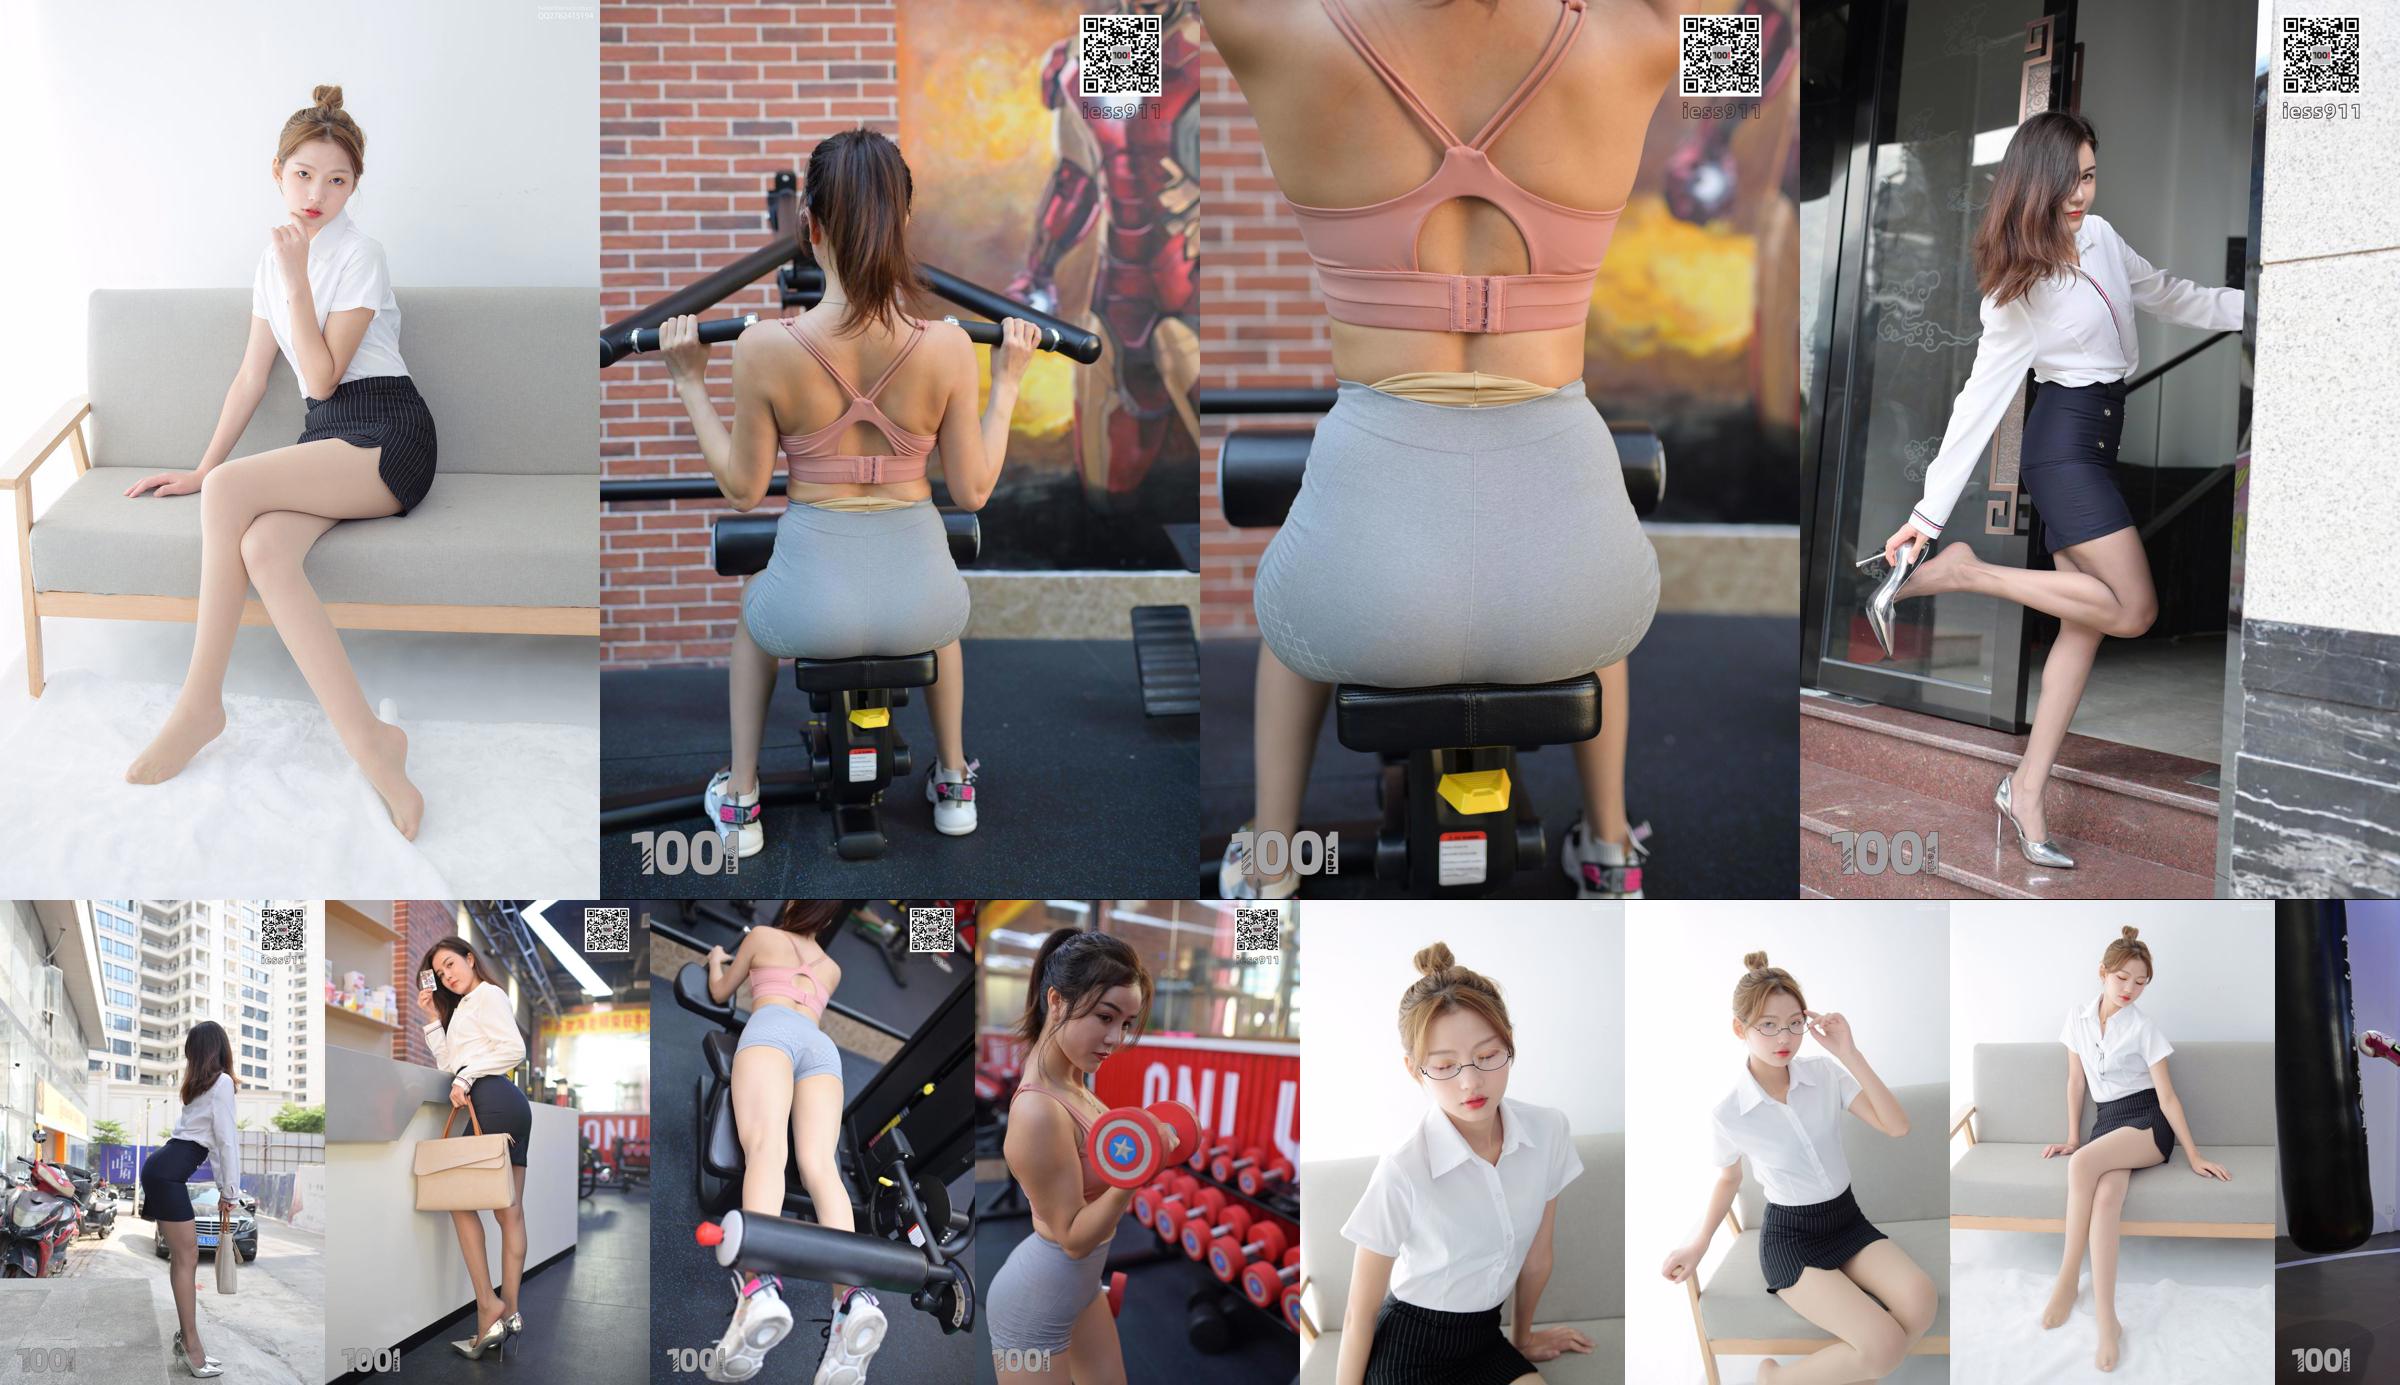 [IESS One Thousand One Nights] "OL Going Fitness After get off work 2" เรียวขาสวย No.0663cb หน้า 6